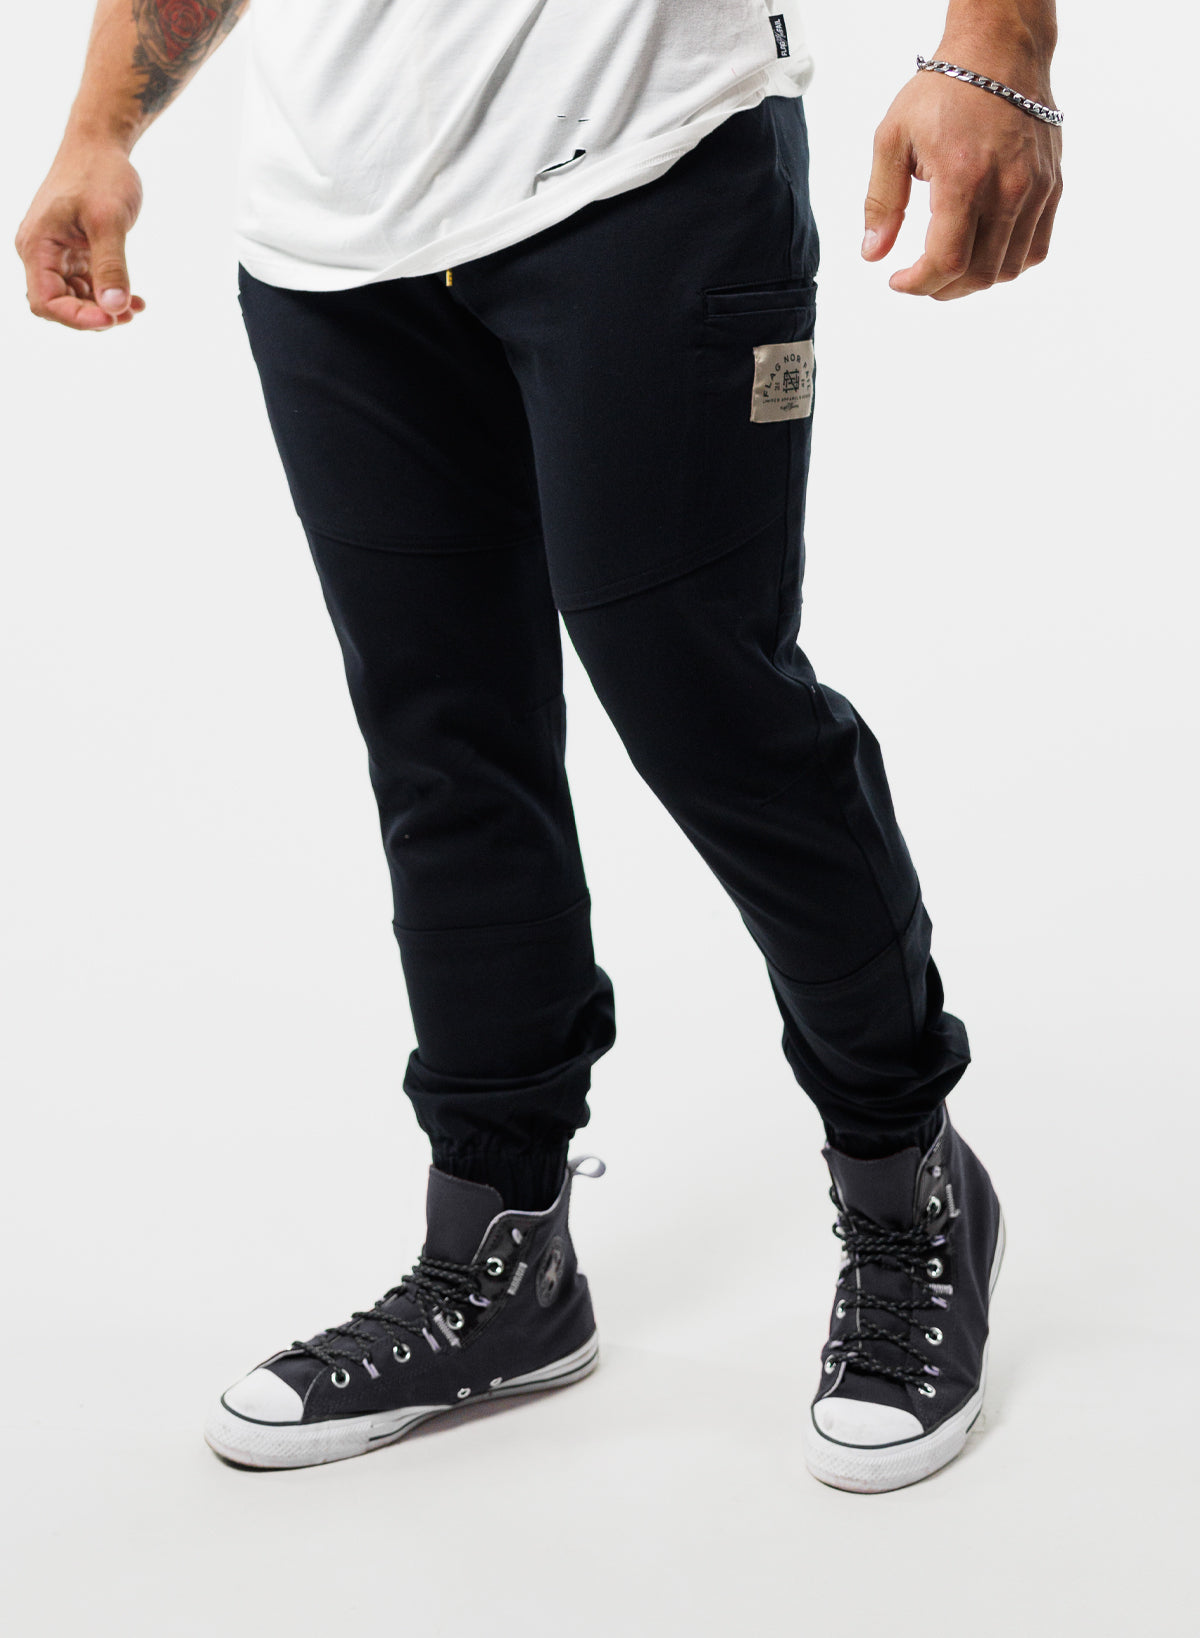 JOGGERS FOREVER - NEGRO